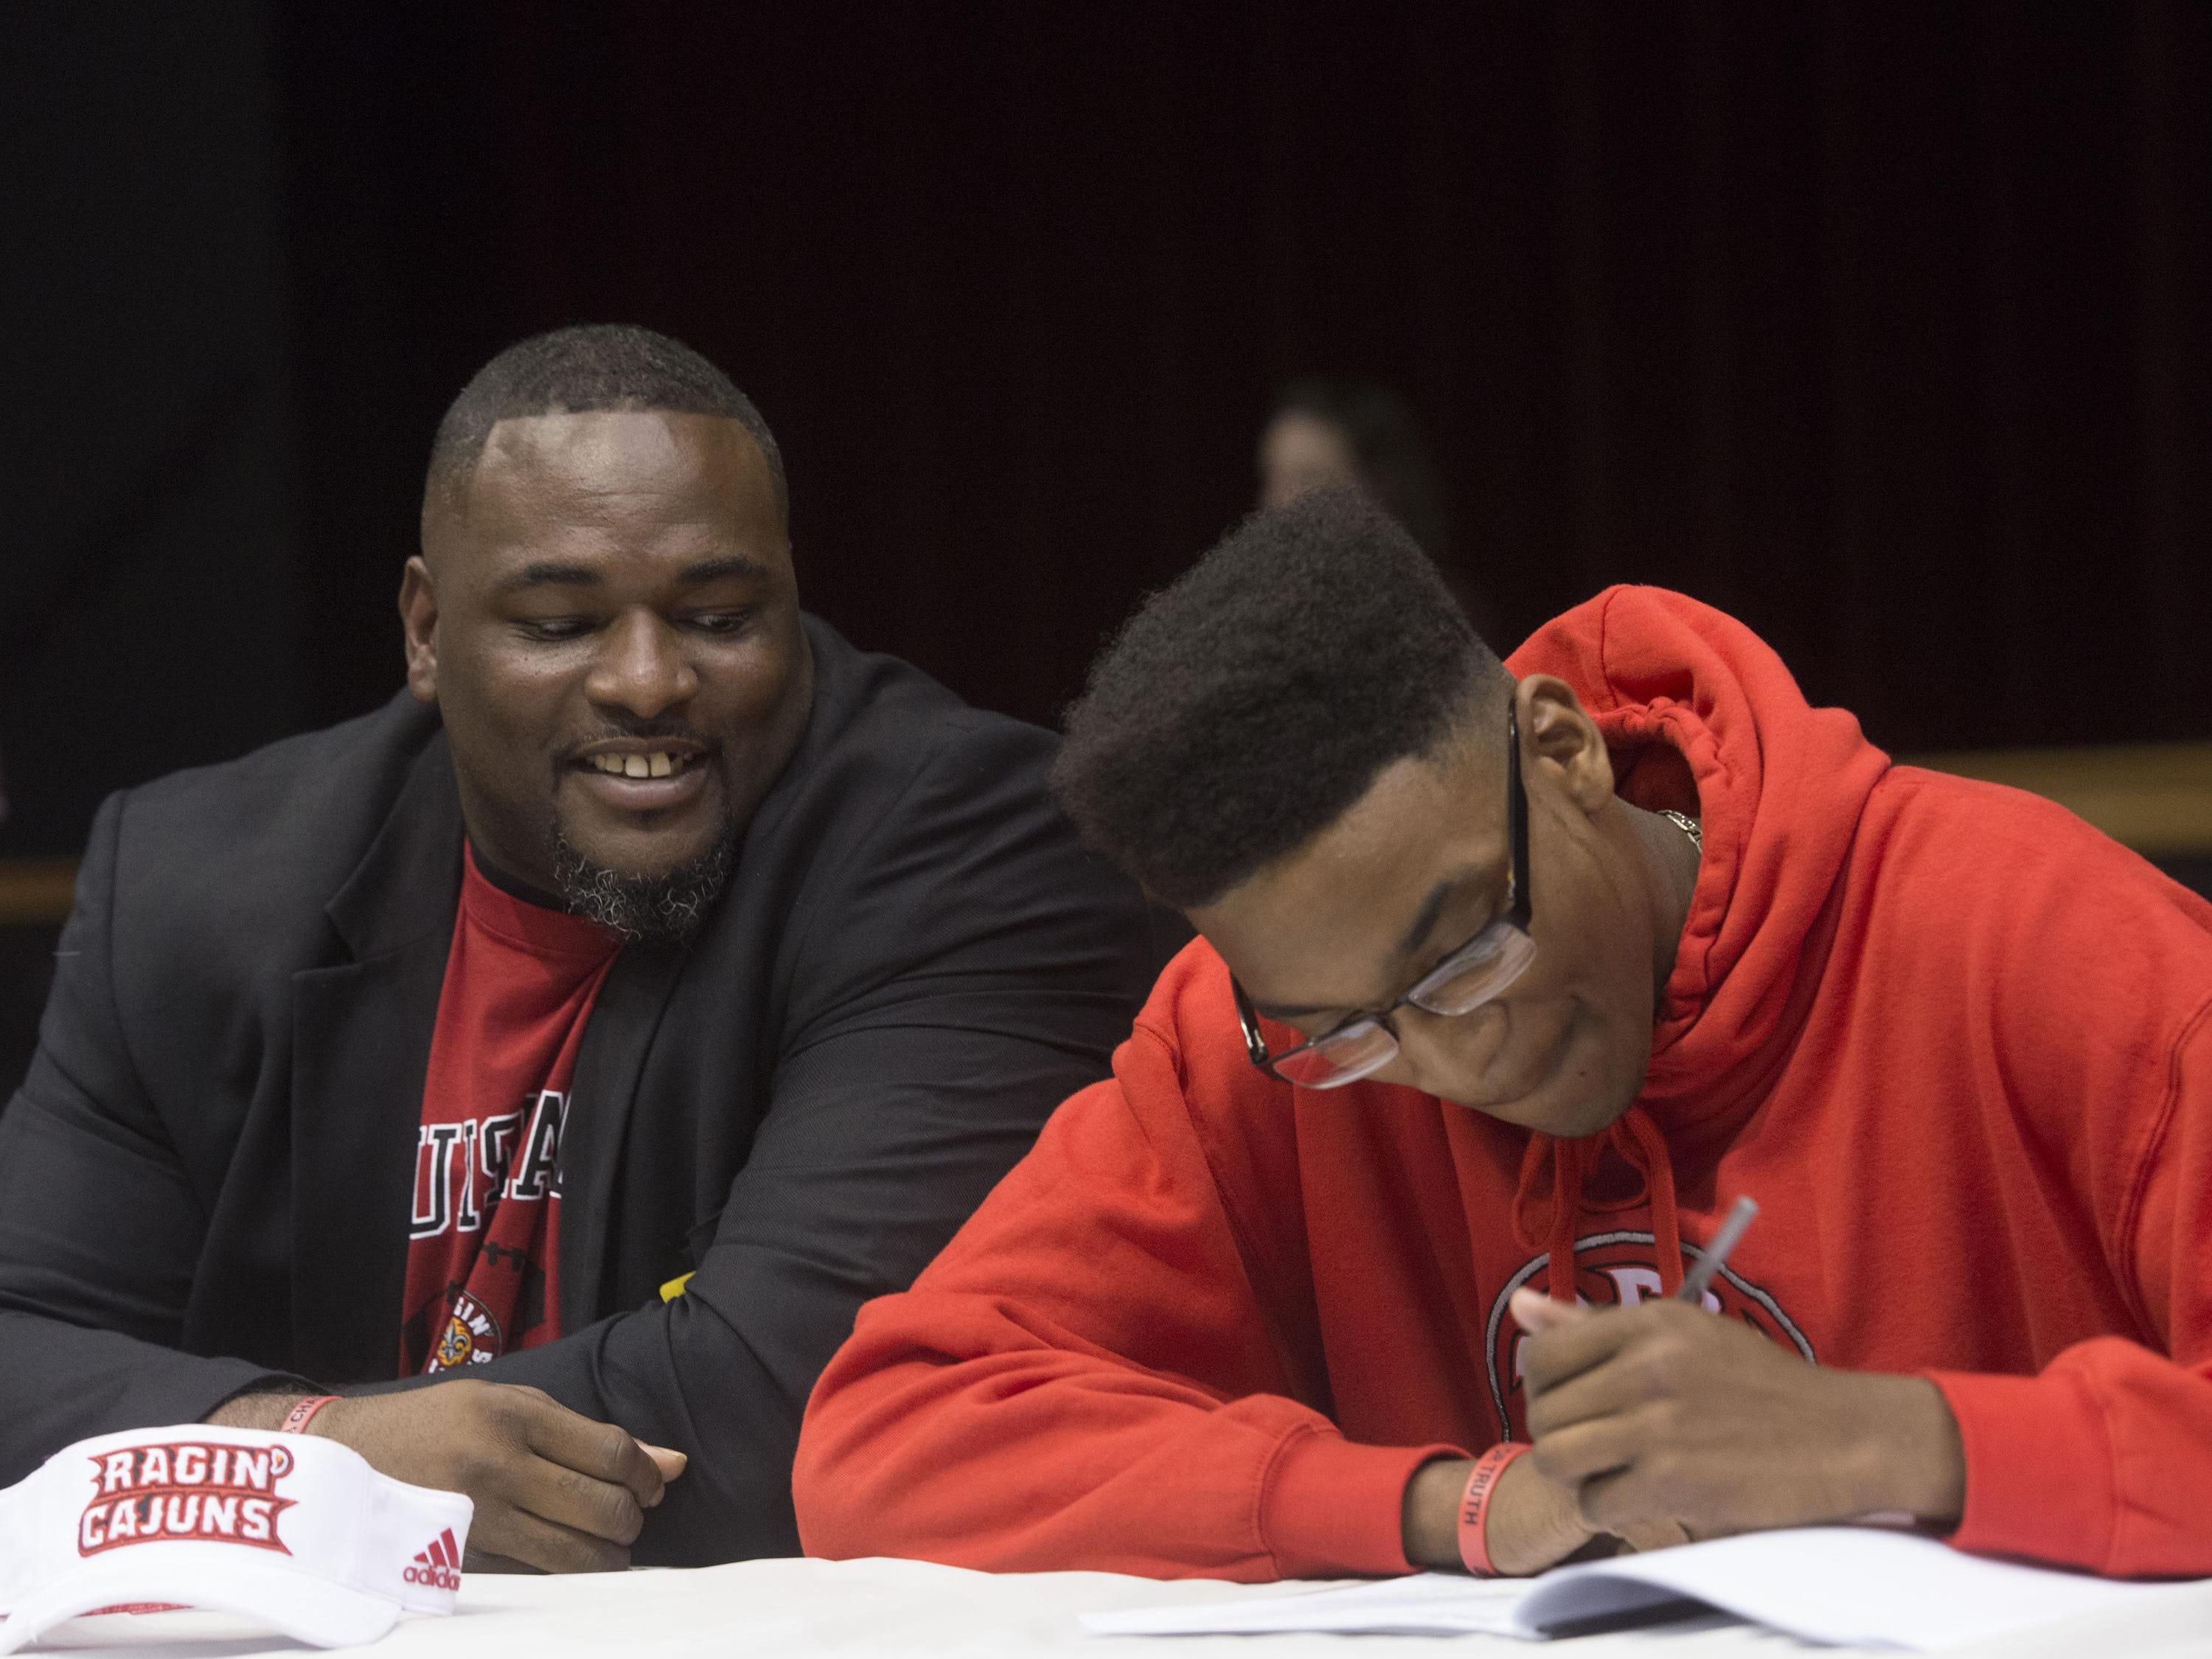 Pensacola High School's Calif Gossett, right, signs a commitment letter to University of Louisiana at Lafayette during national signing day while his stepfather Anthony Crenshaw, left, looks on